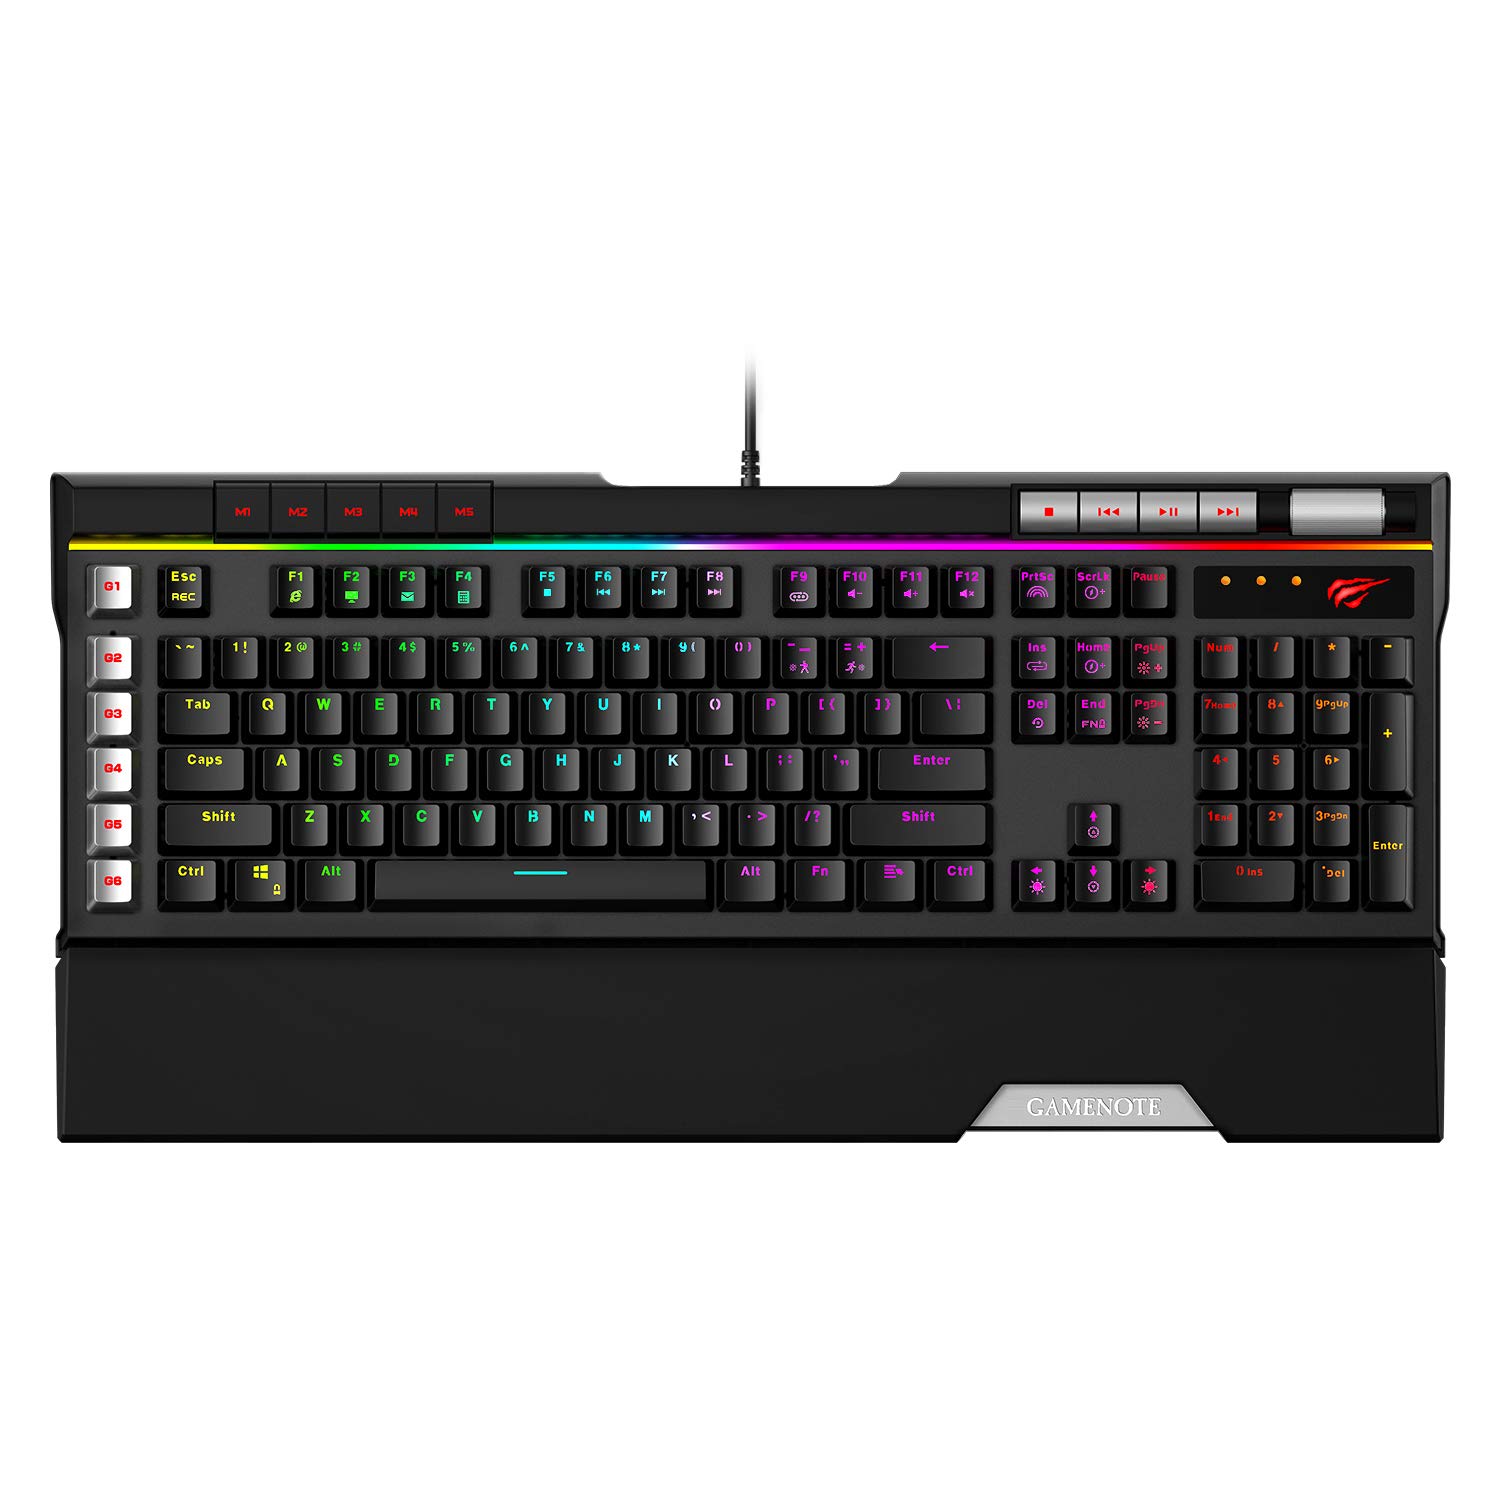 KB462L Mechanical Keyboard with Detachable Wrist Rest, RGB Backlights, Macro Buttons